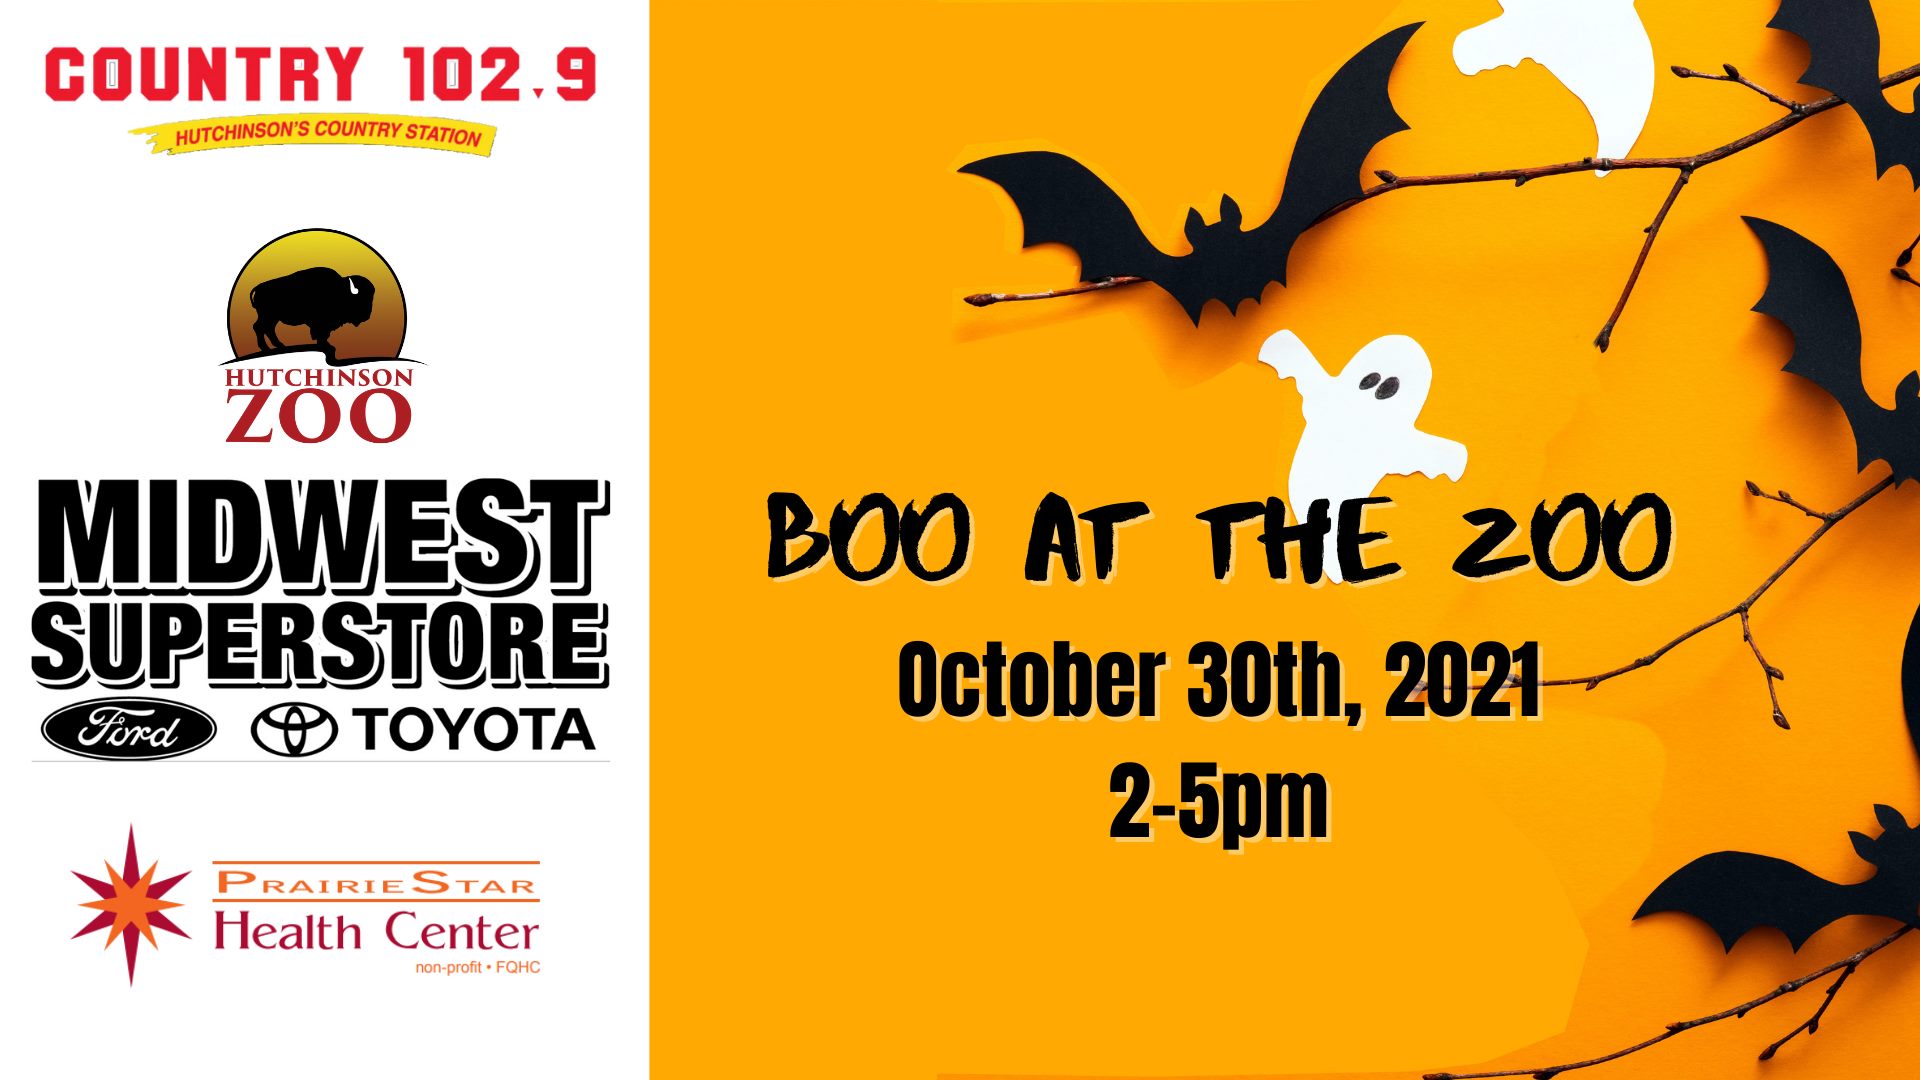 Event Promo Photo For Boo at the Zoo